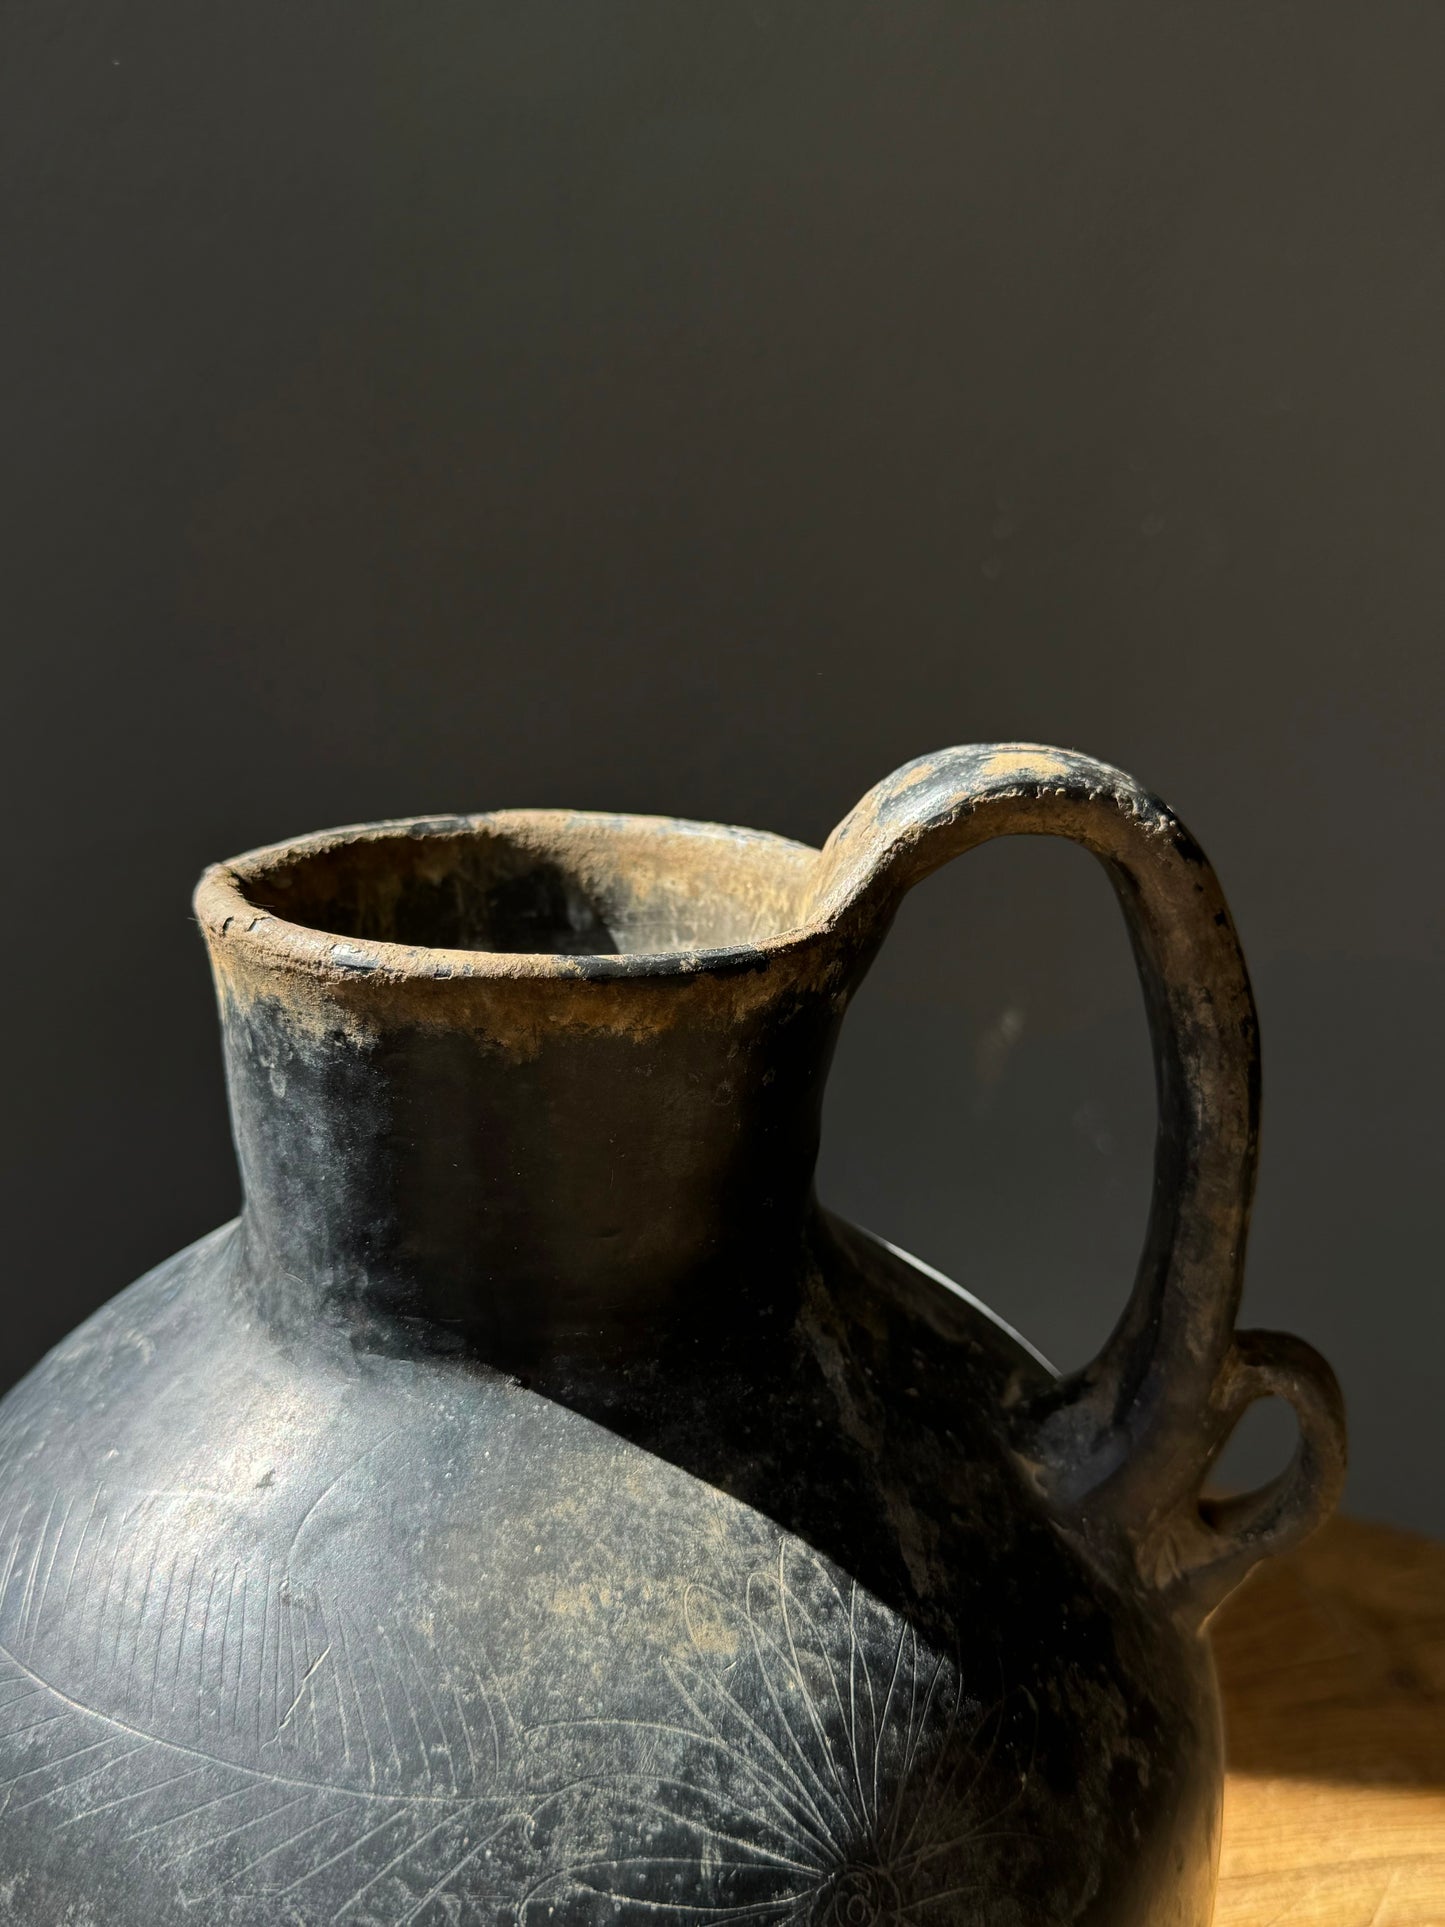 Black Clay Ceramic Pitcher With Flower Engraving From Coyotepec, Oaxaca, Circa 1940’s